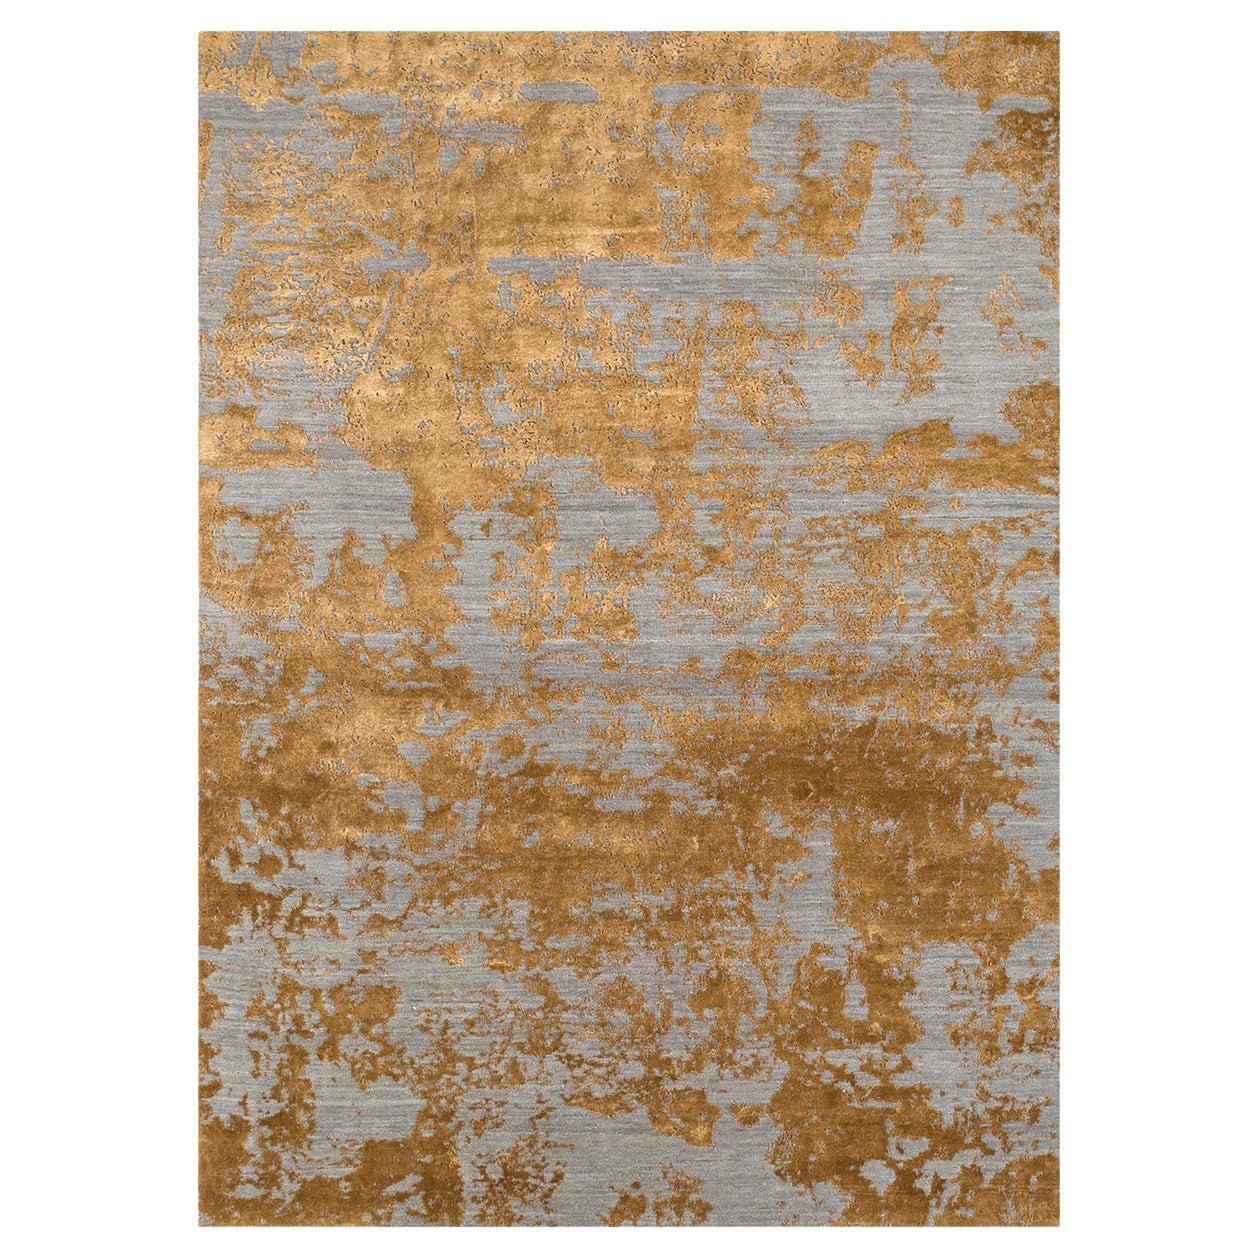 Flake Rug by Rural Weavers, Knotted, Wool, Bamboo Silk, 240x300cm For Sale